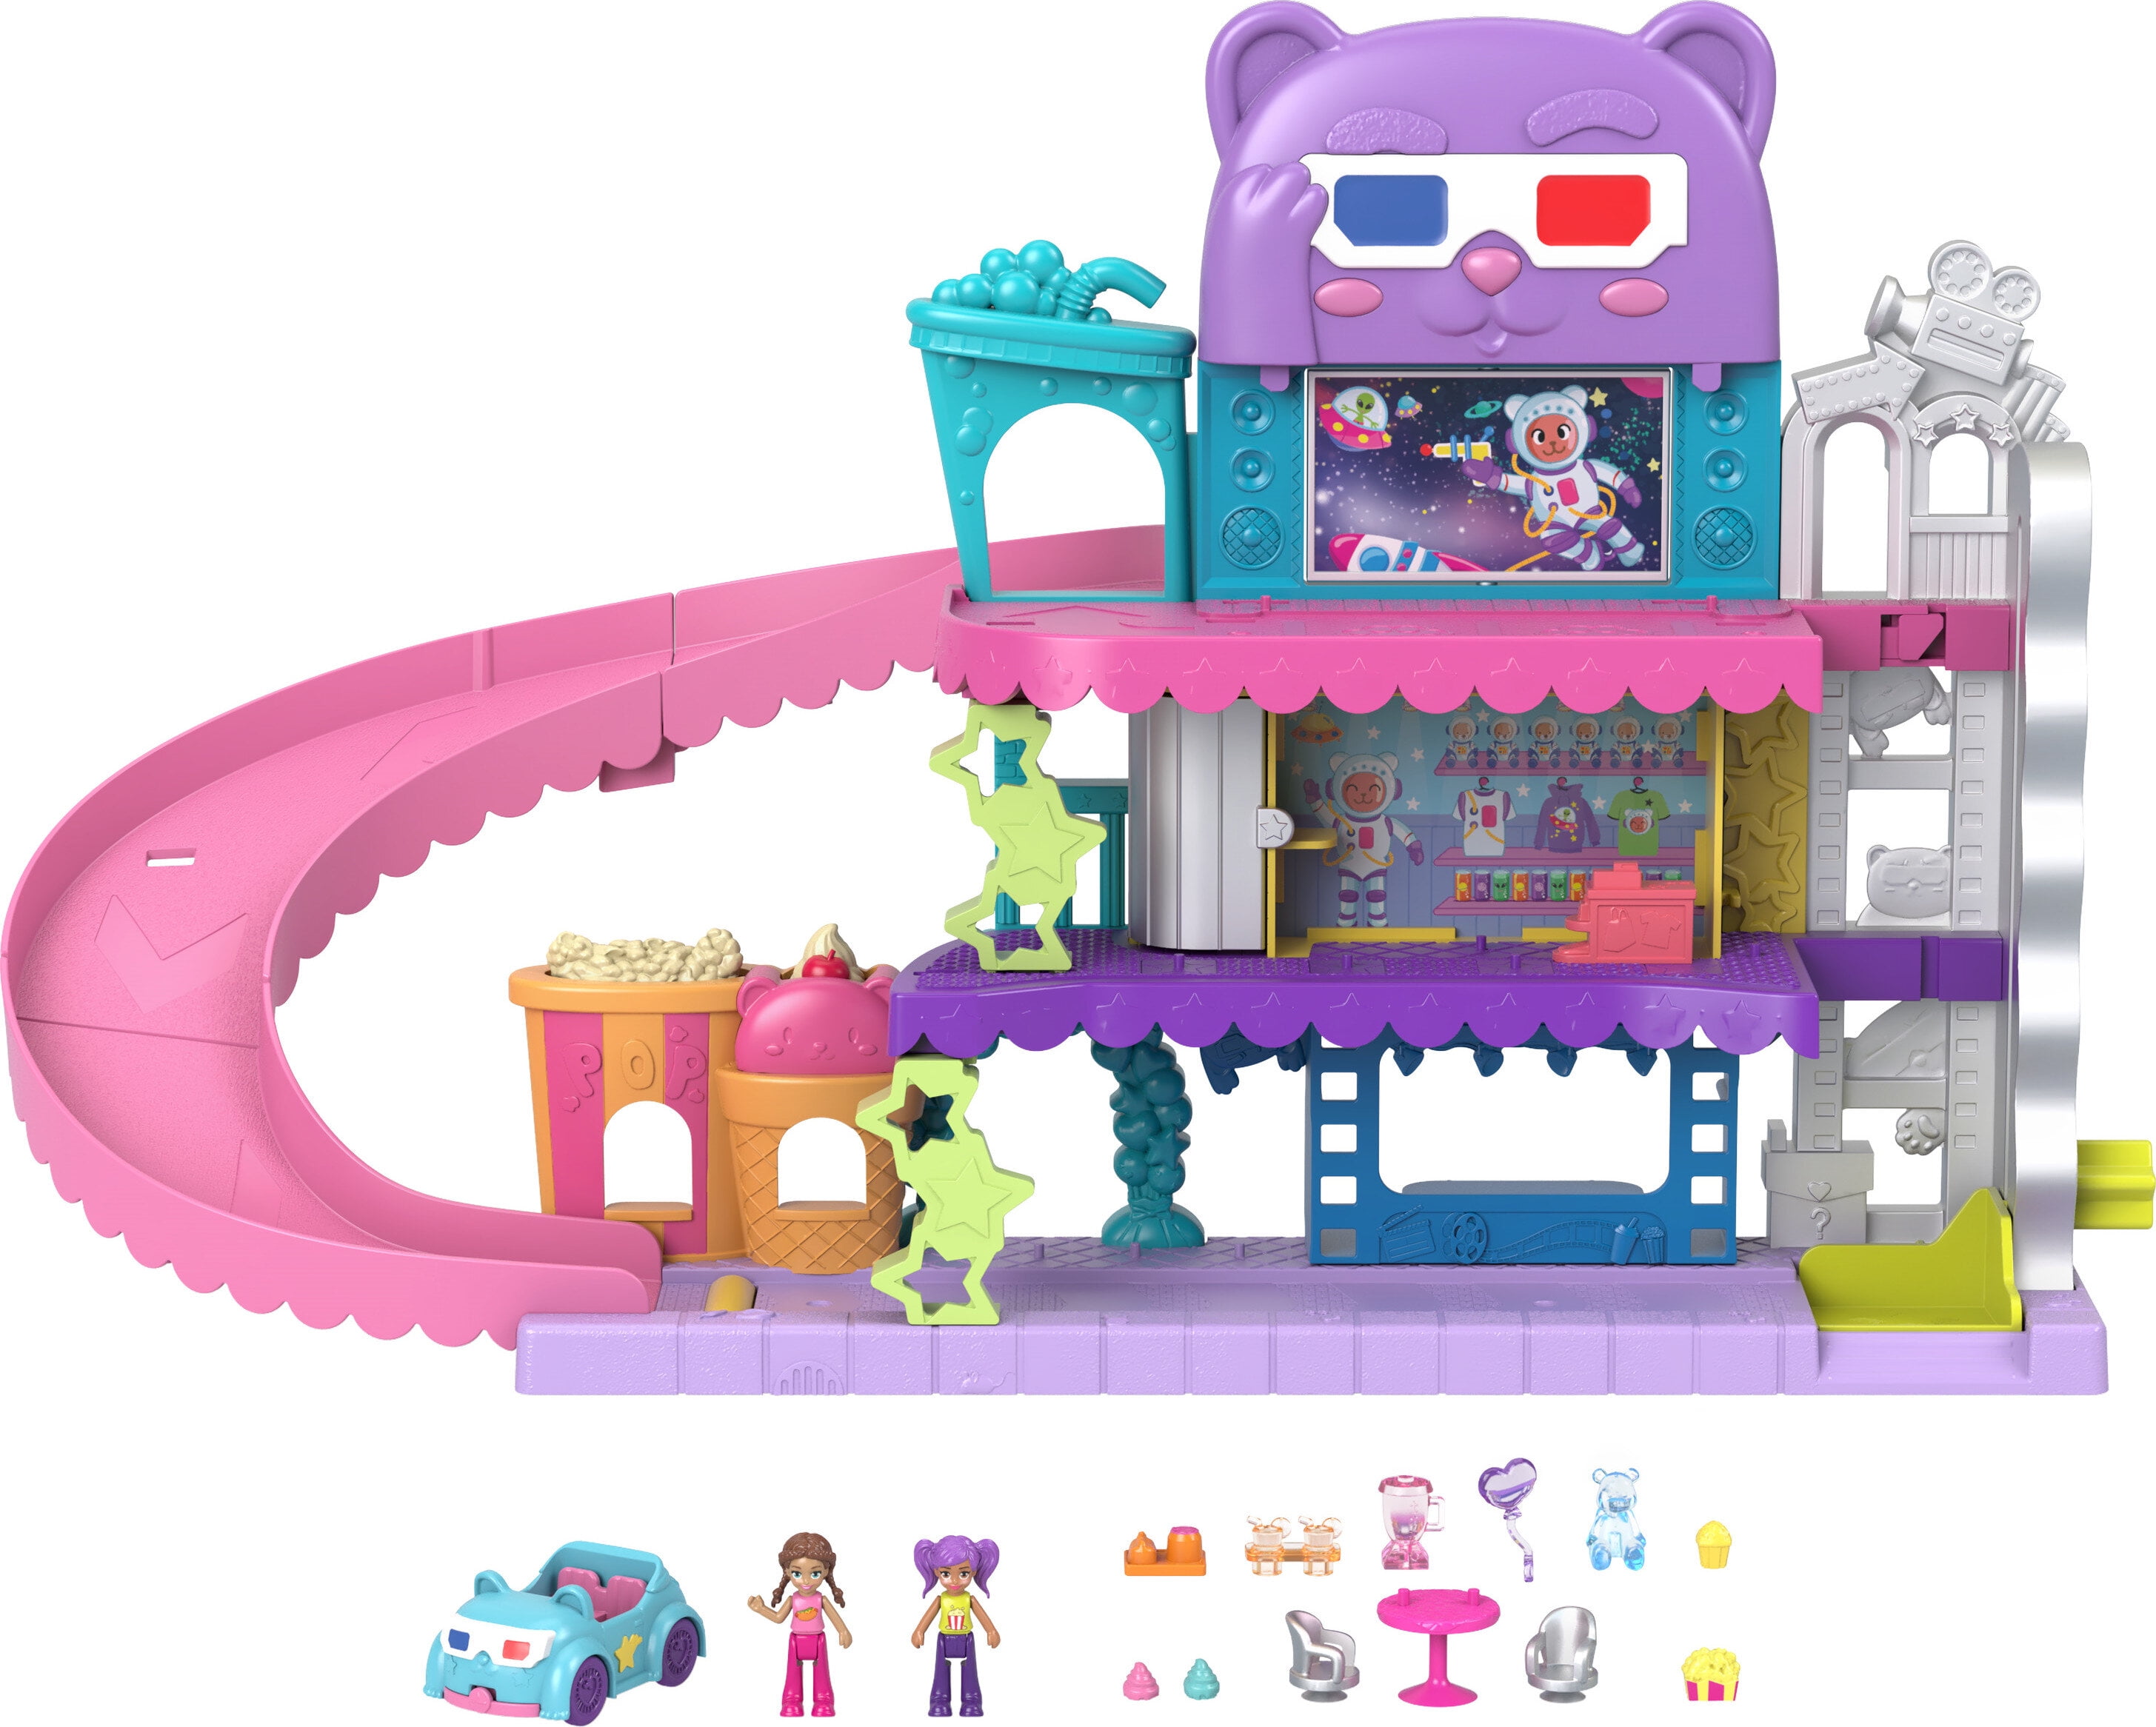 Recreate Your Favorite 'Friends' Scenes With The New 'Friends' Polly Pocket  Compact